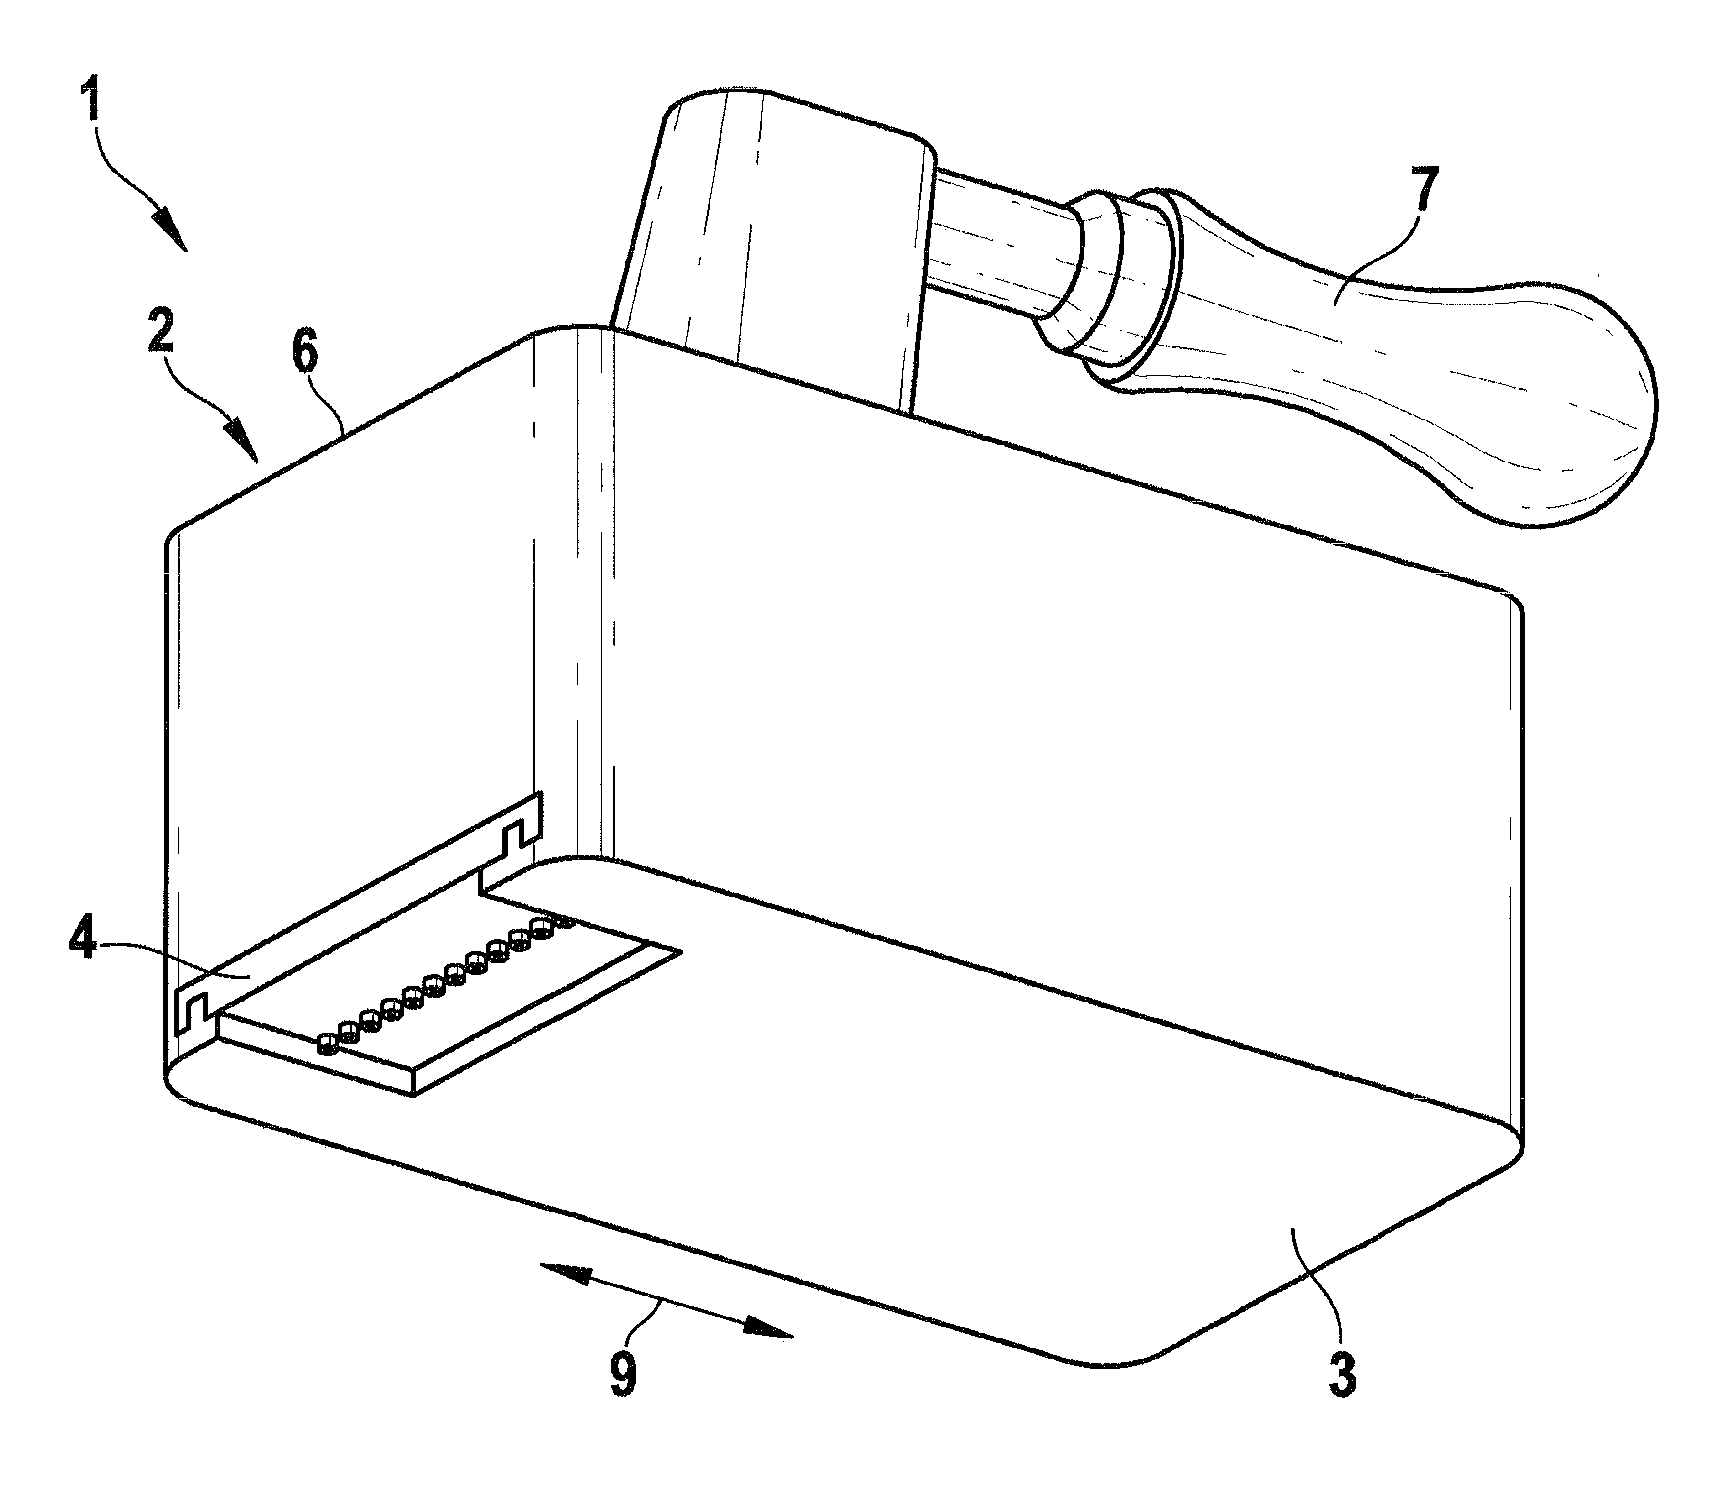 Device for applying liquid coating materials